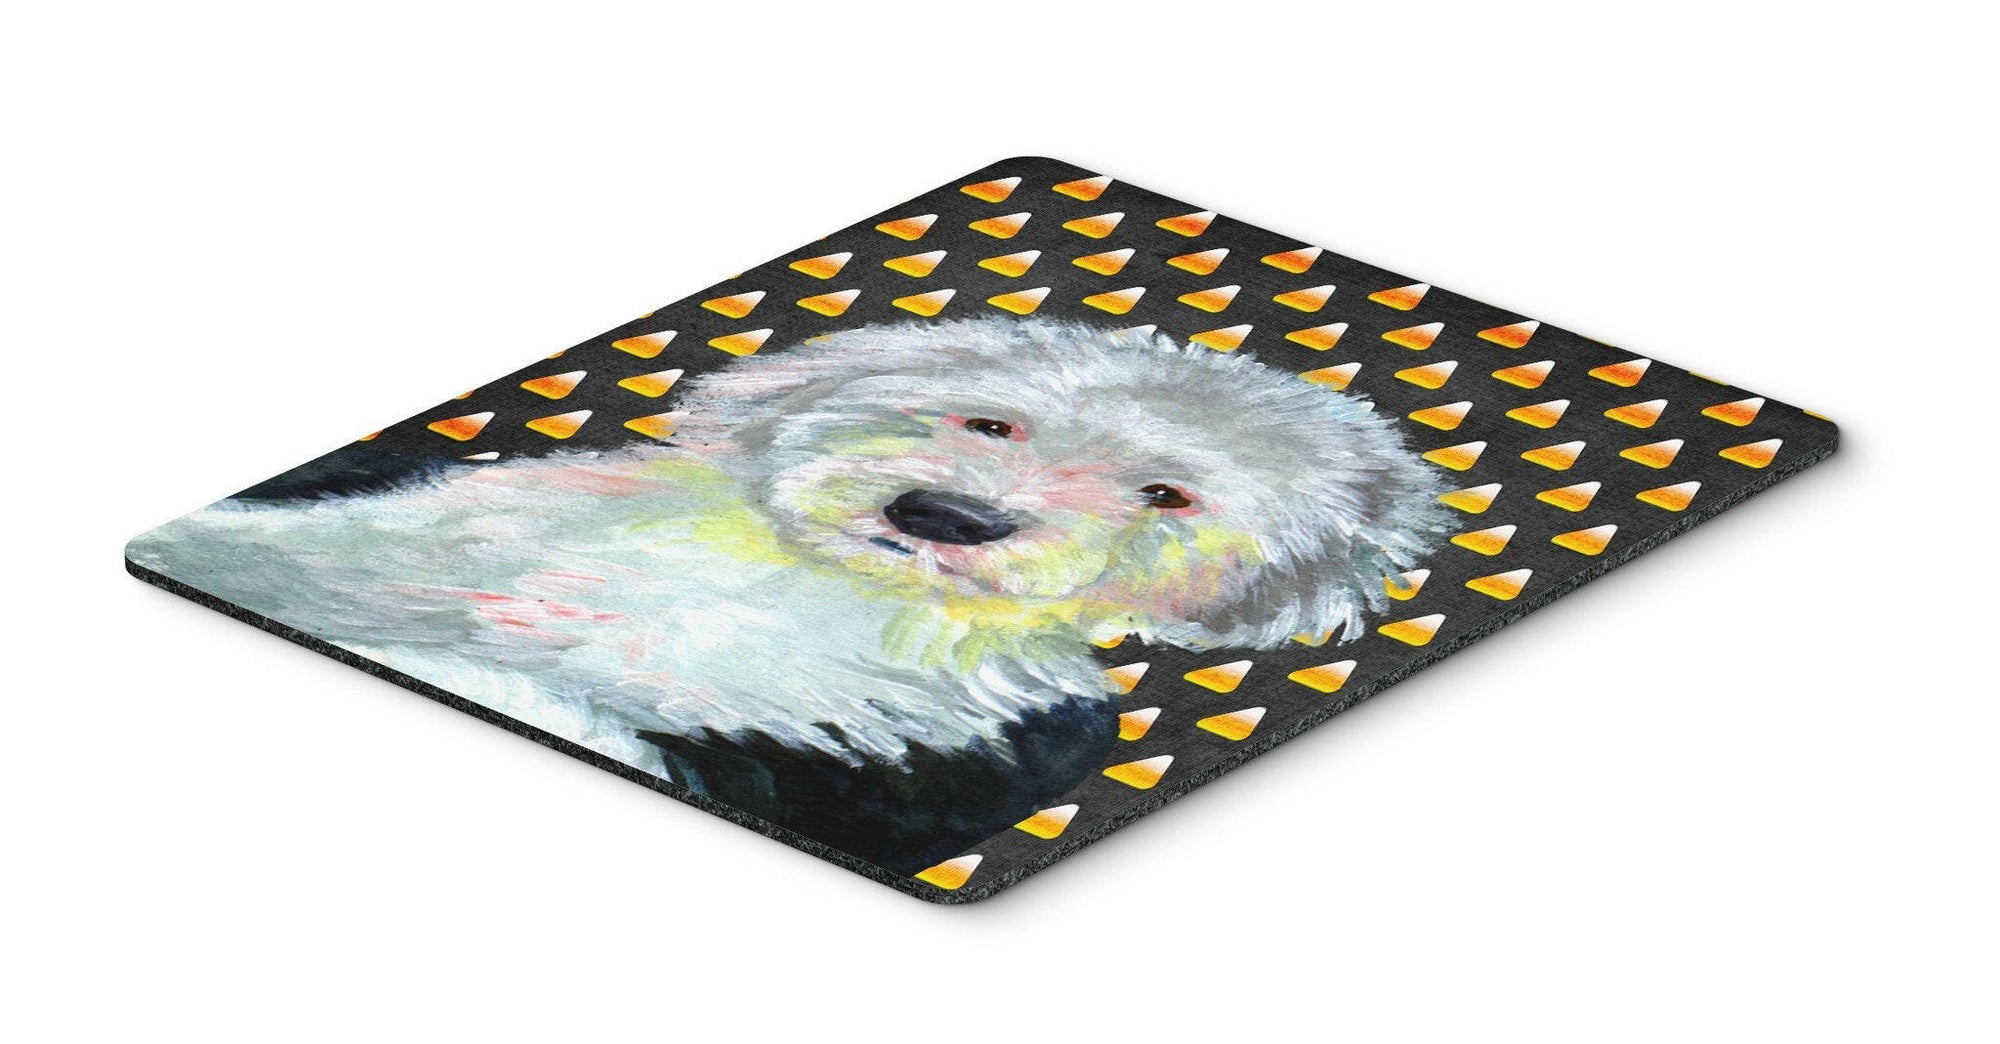 Old English Sheepdog Candy Corn Halloween Portrait Mouse Pad, Hot Pad or Trivet by Caroline's Treasures